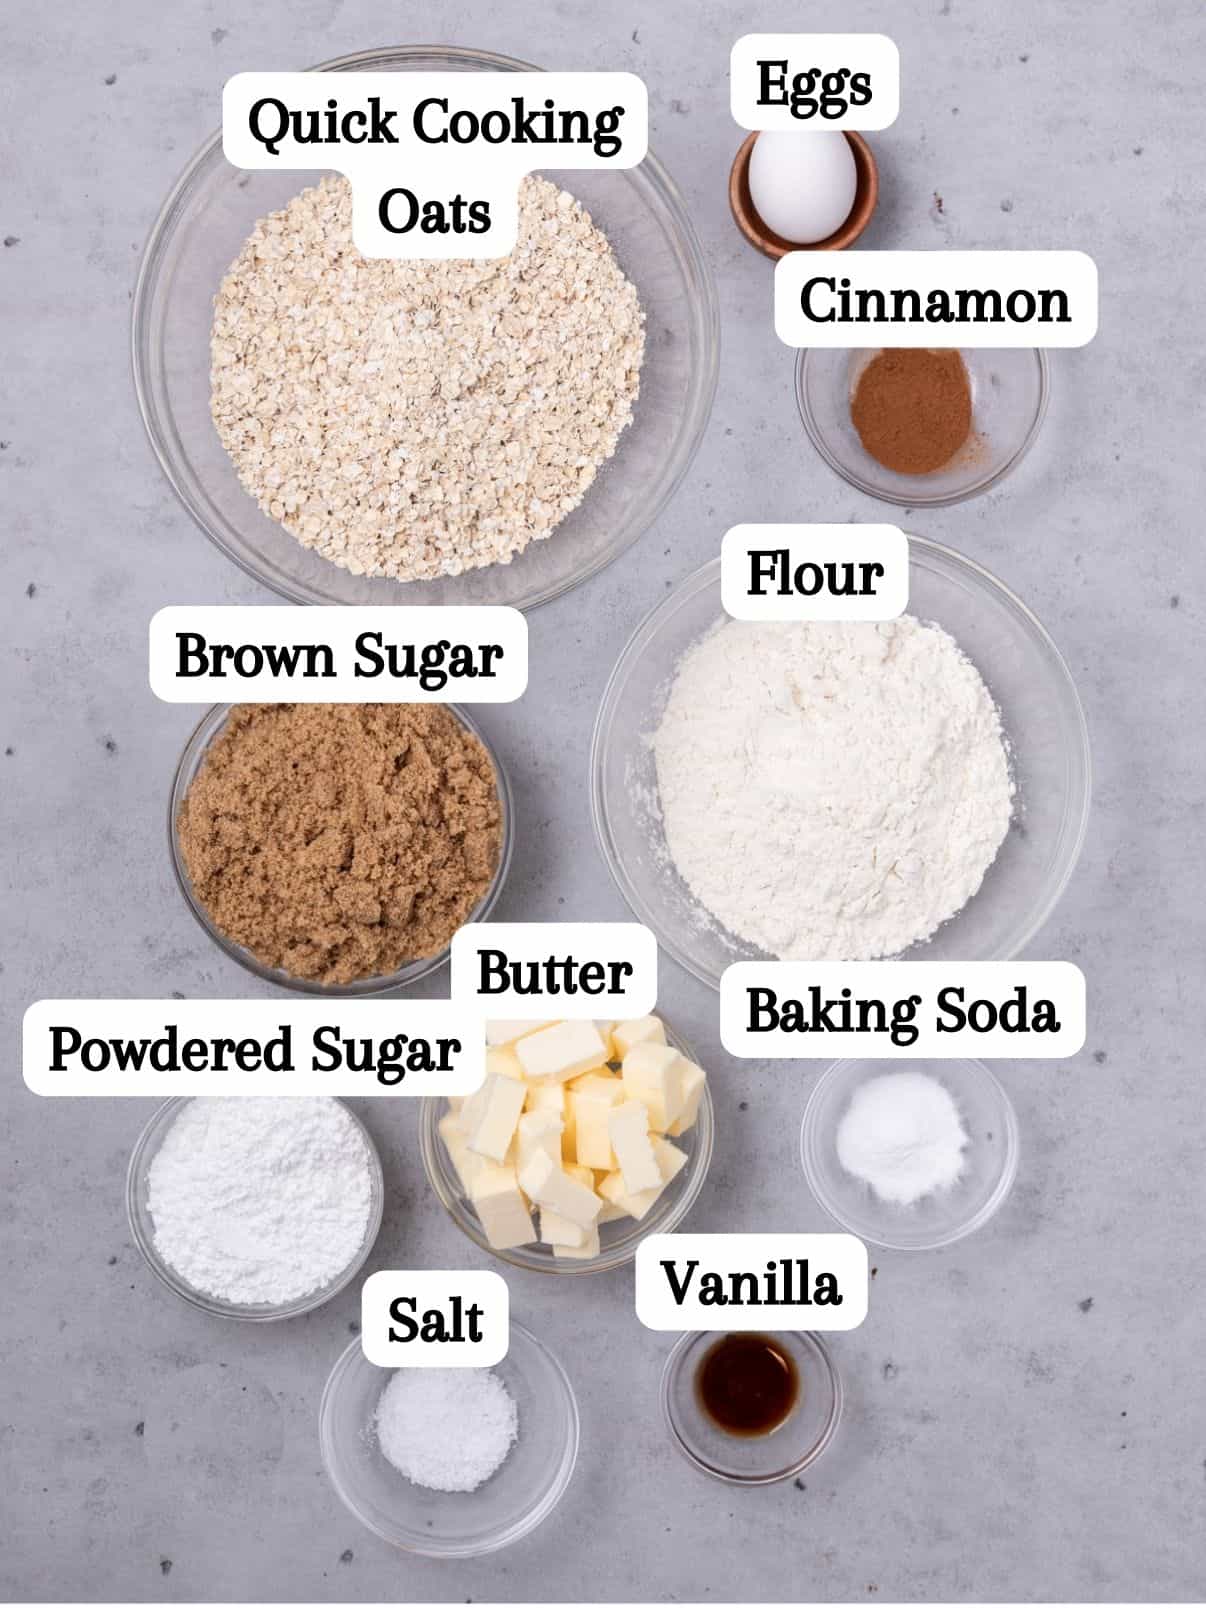 All of the ingredients laid out and labeled on a grey background.